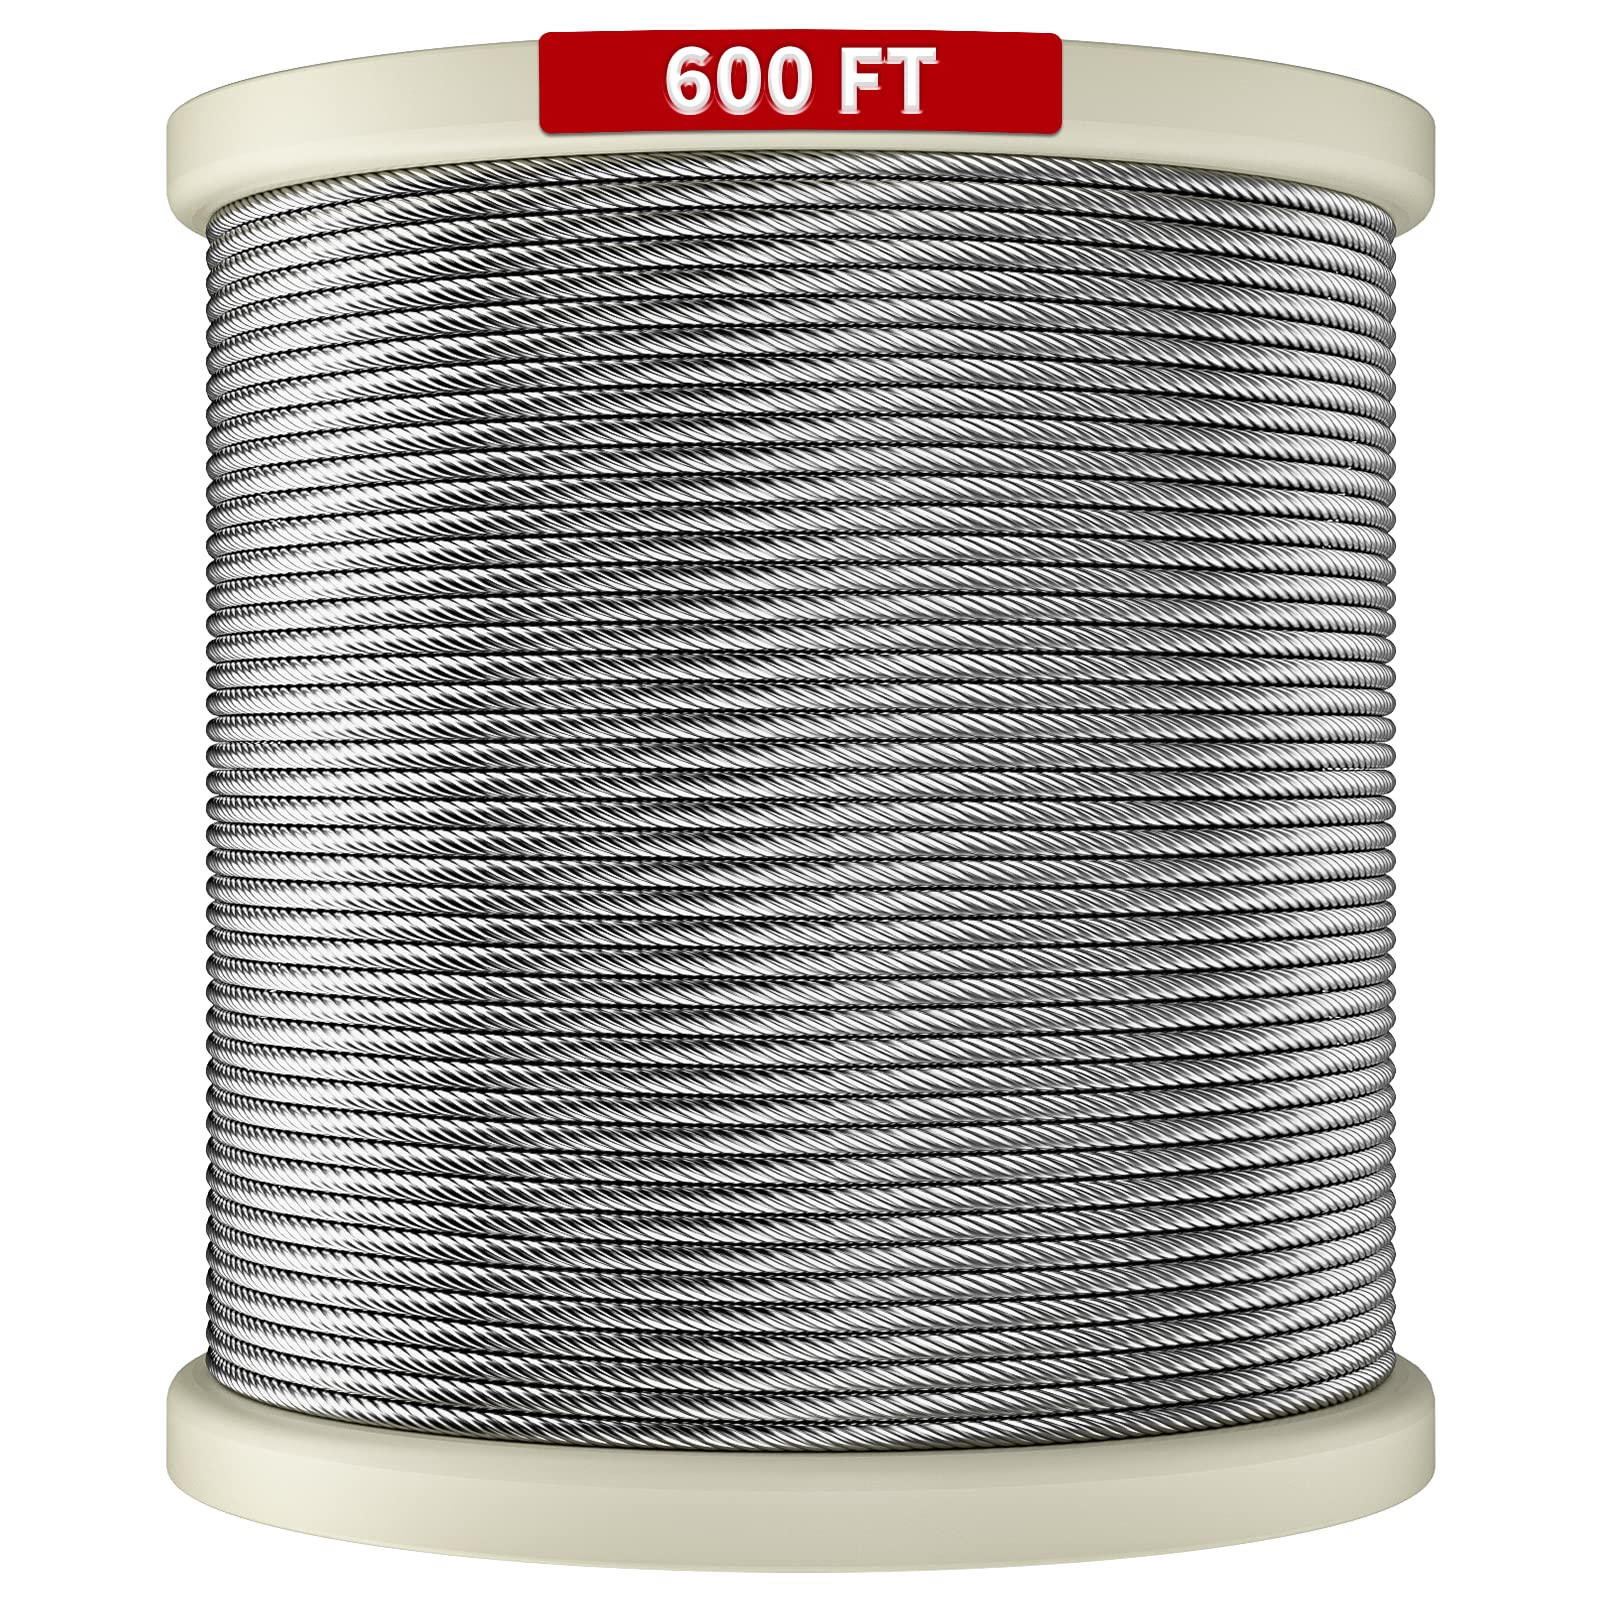 LuckIn 600FT Deck Railing Cable - 1/8" Diameter T316 Stainless Steel Cable, Premium 7x7 Strands Wire Railing Hardware